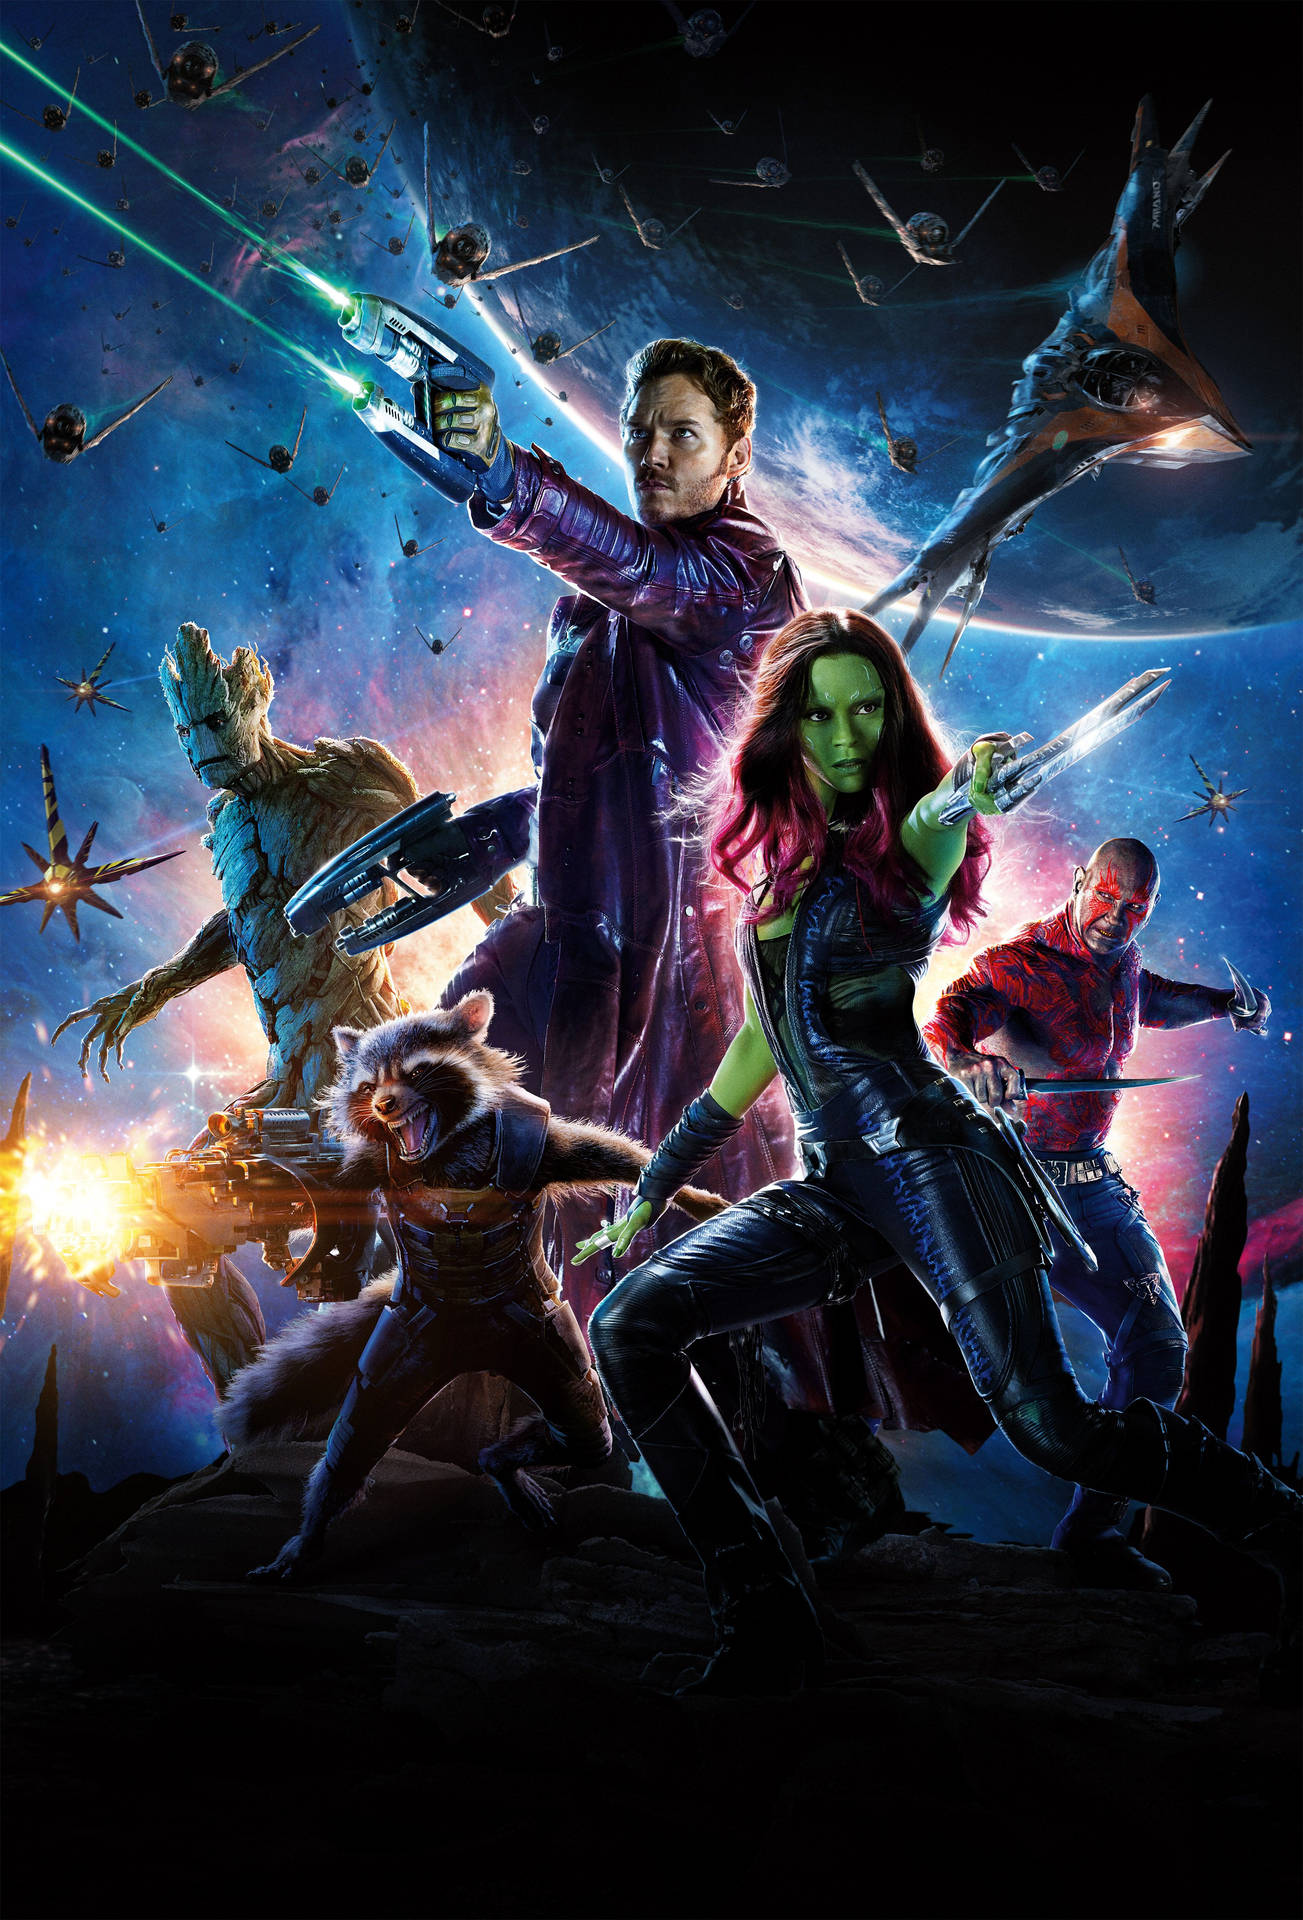 Free Guardians Of The Galaxy Wallpaper Downloads, [100+] Guardians Of The Galaxy  Wallpapers for FREE 